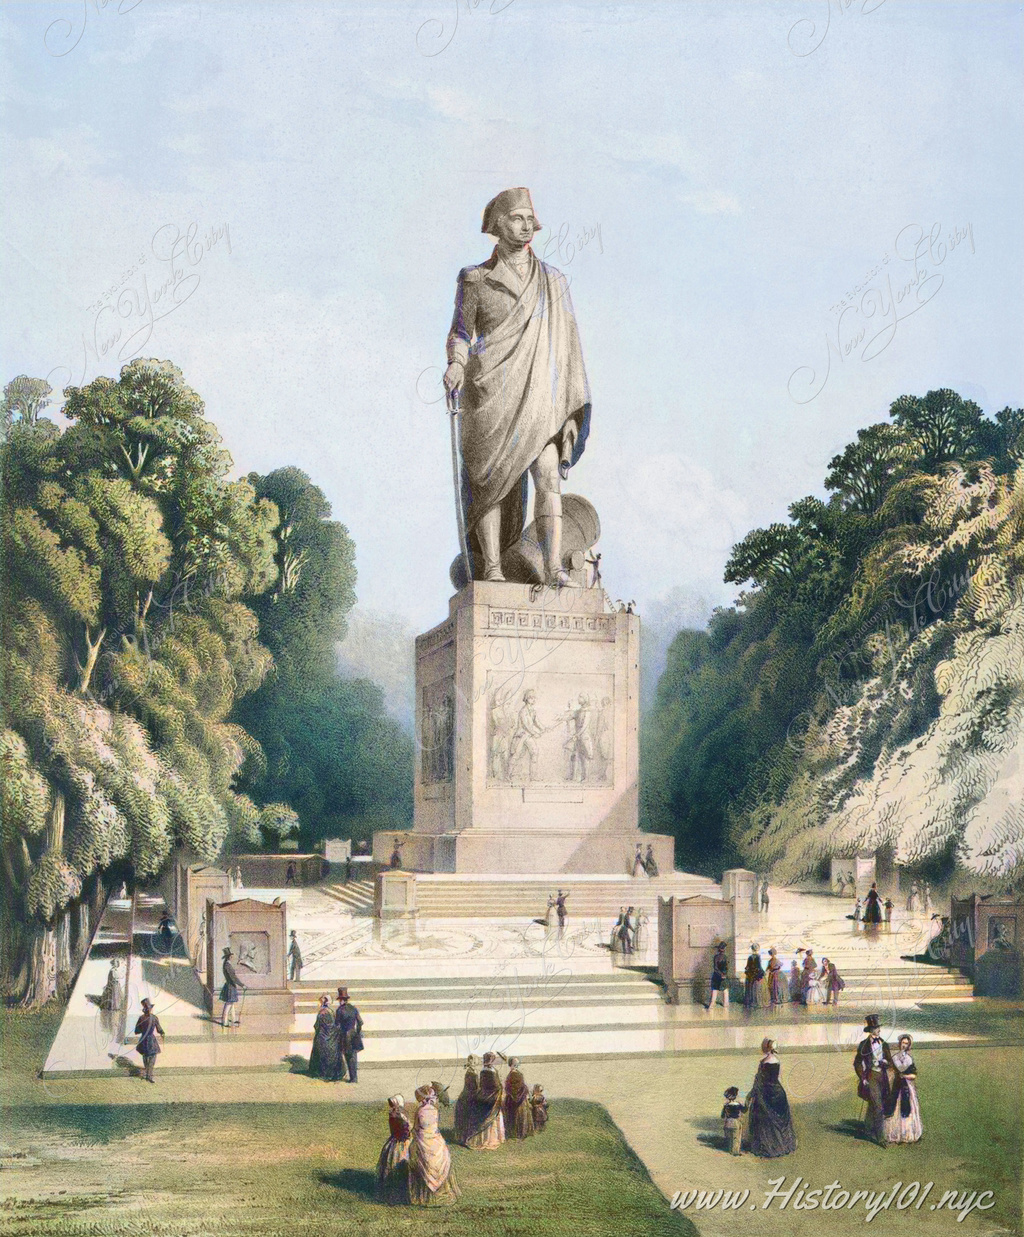 This stone engraving by G.Thomas depicts the grand vision of a colossal statue of George Washington proposed for New York City in 1845.